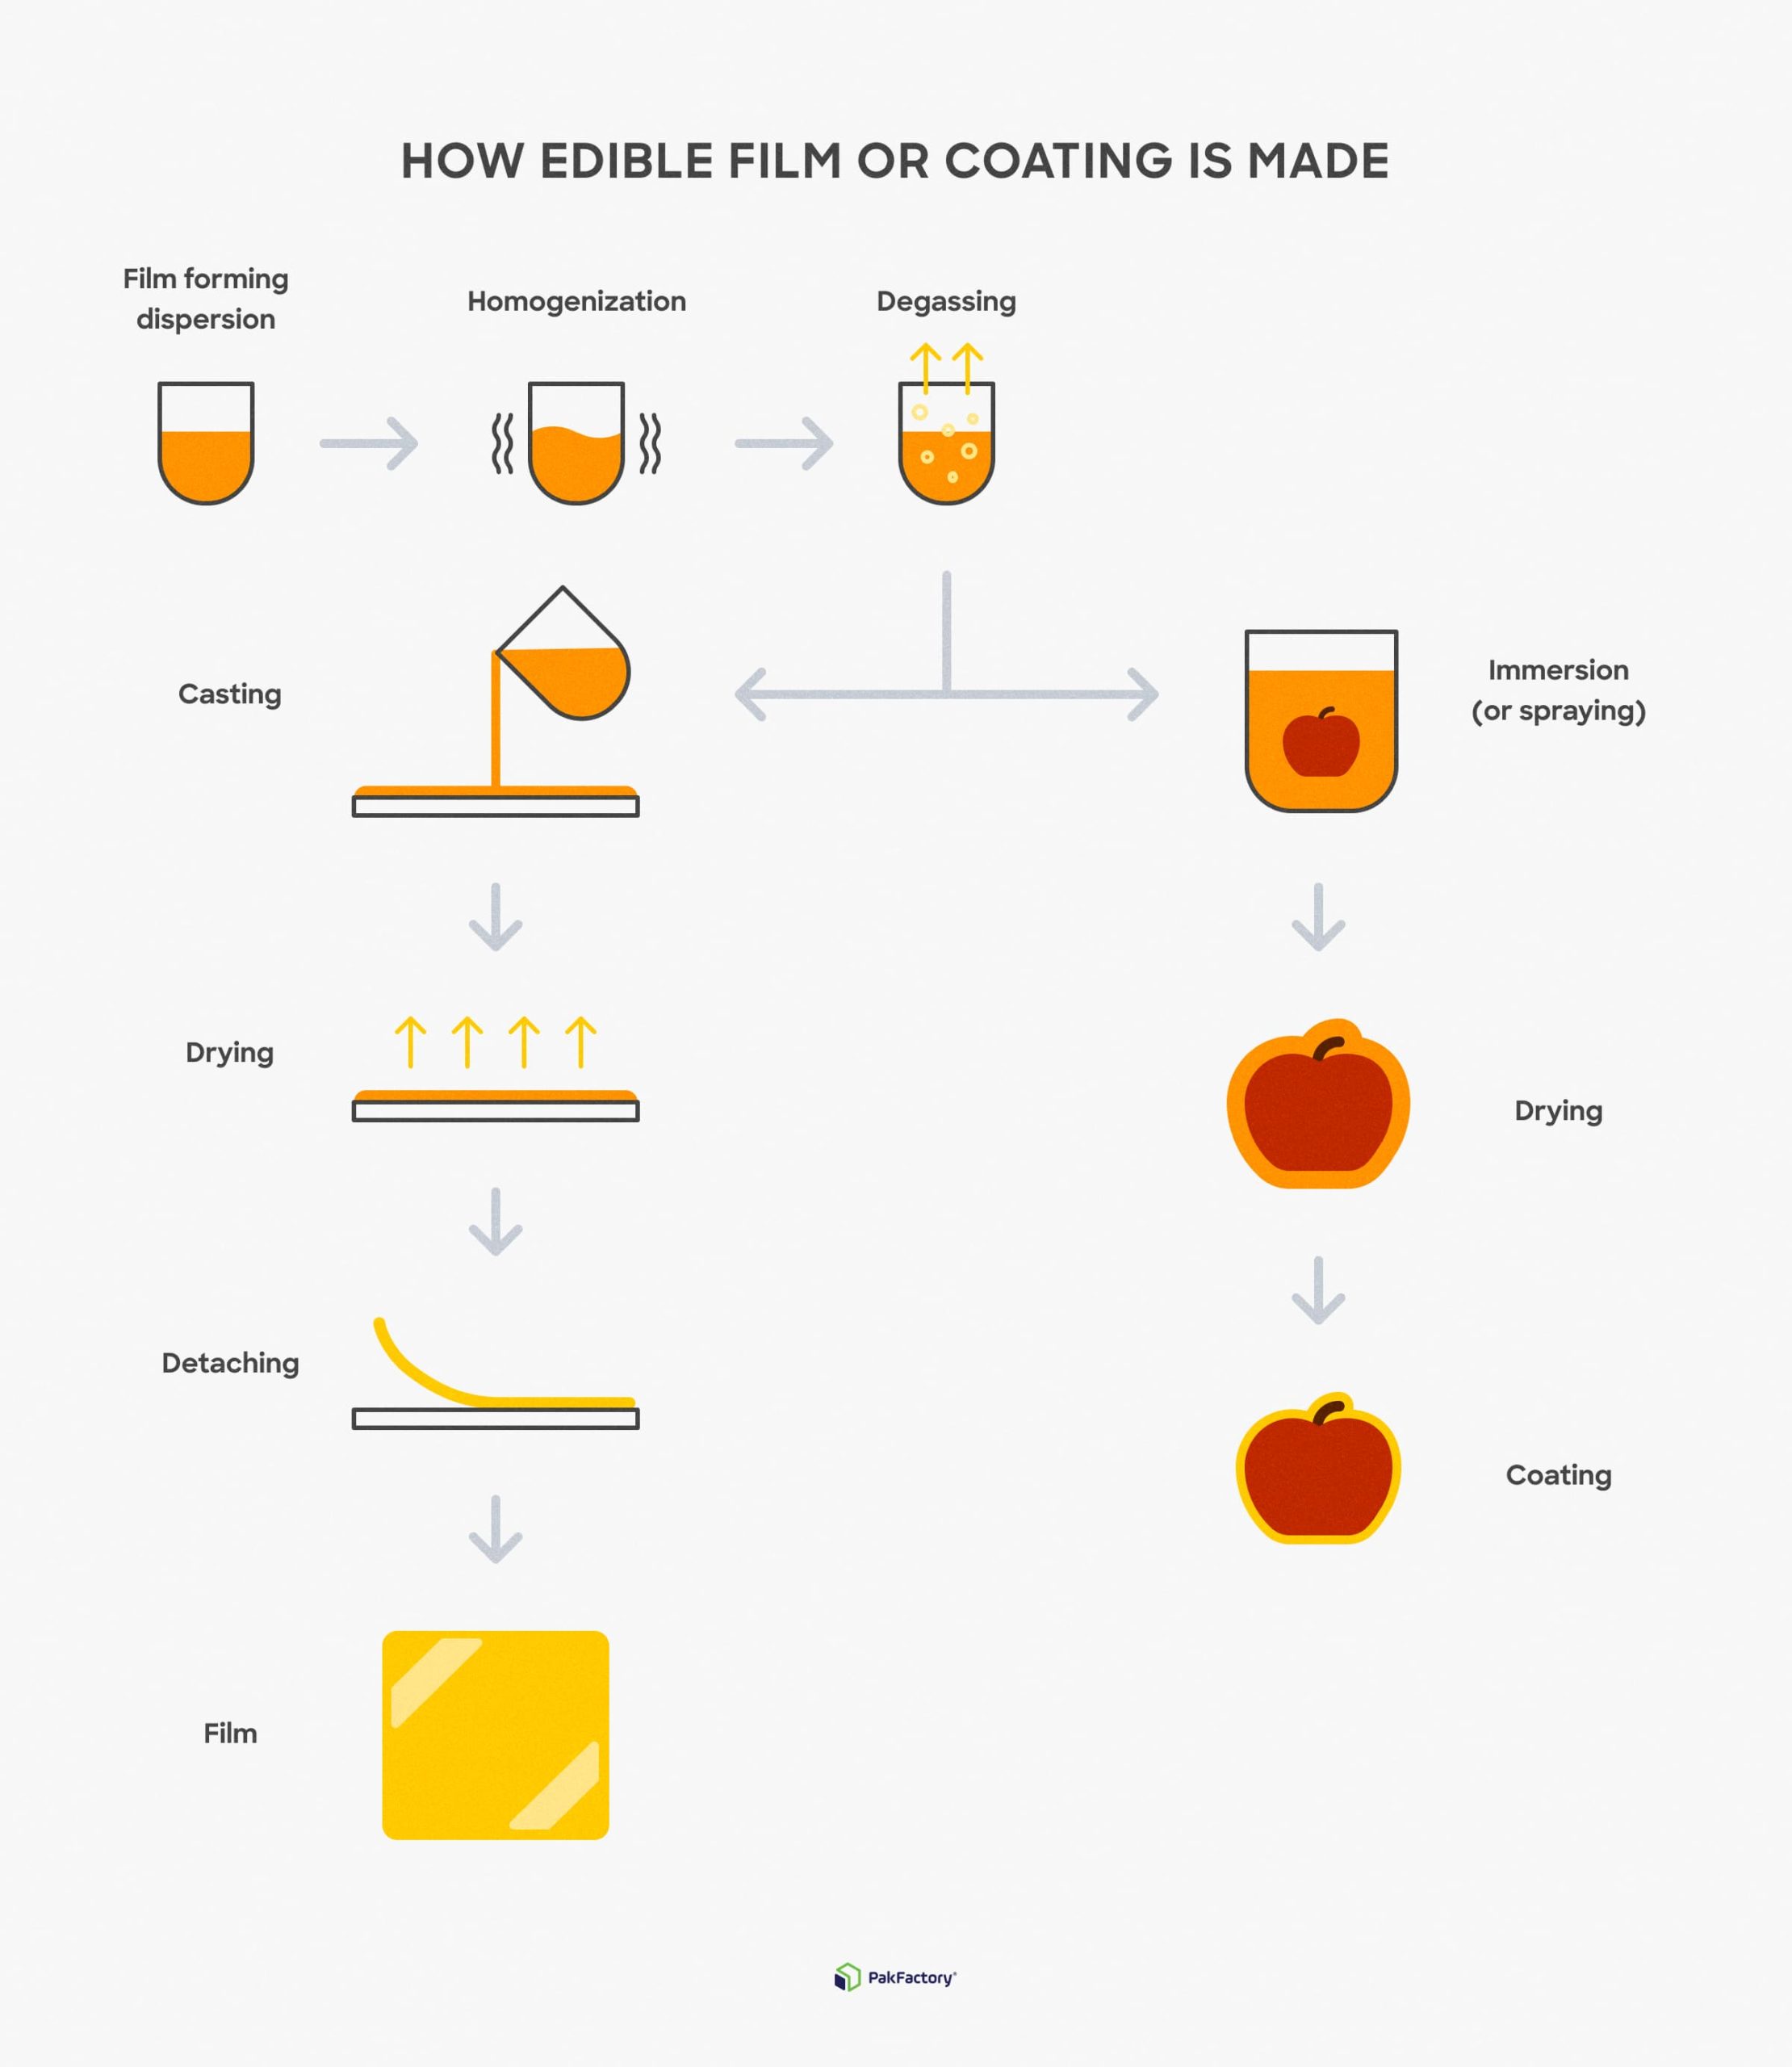 Edible films and coating production process.